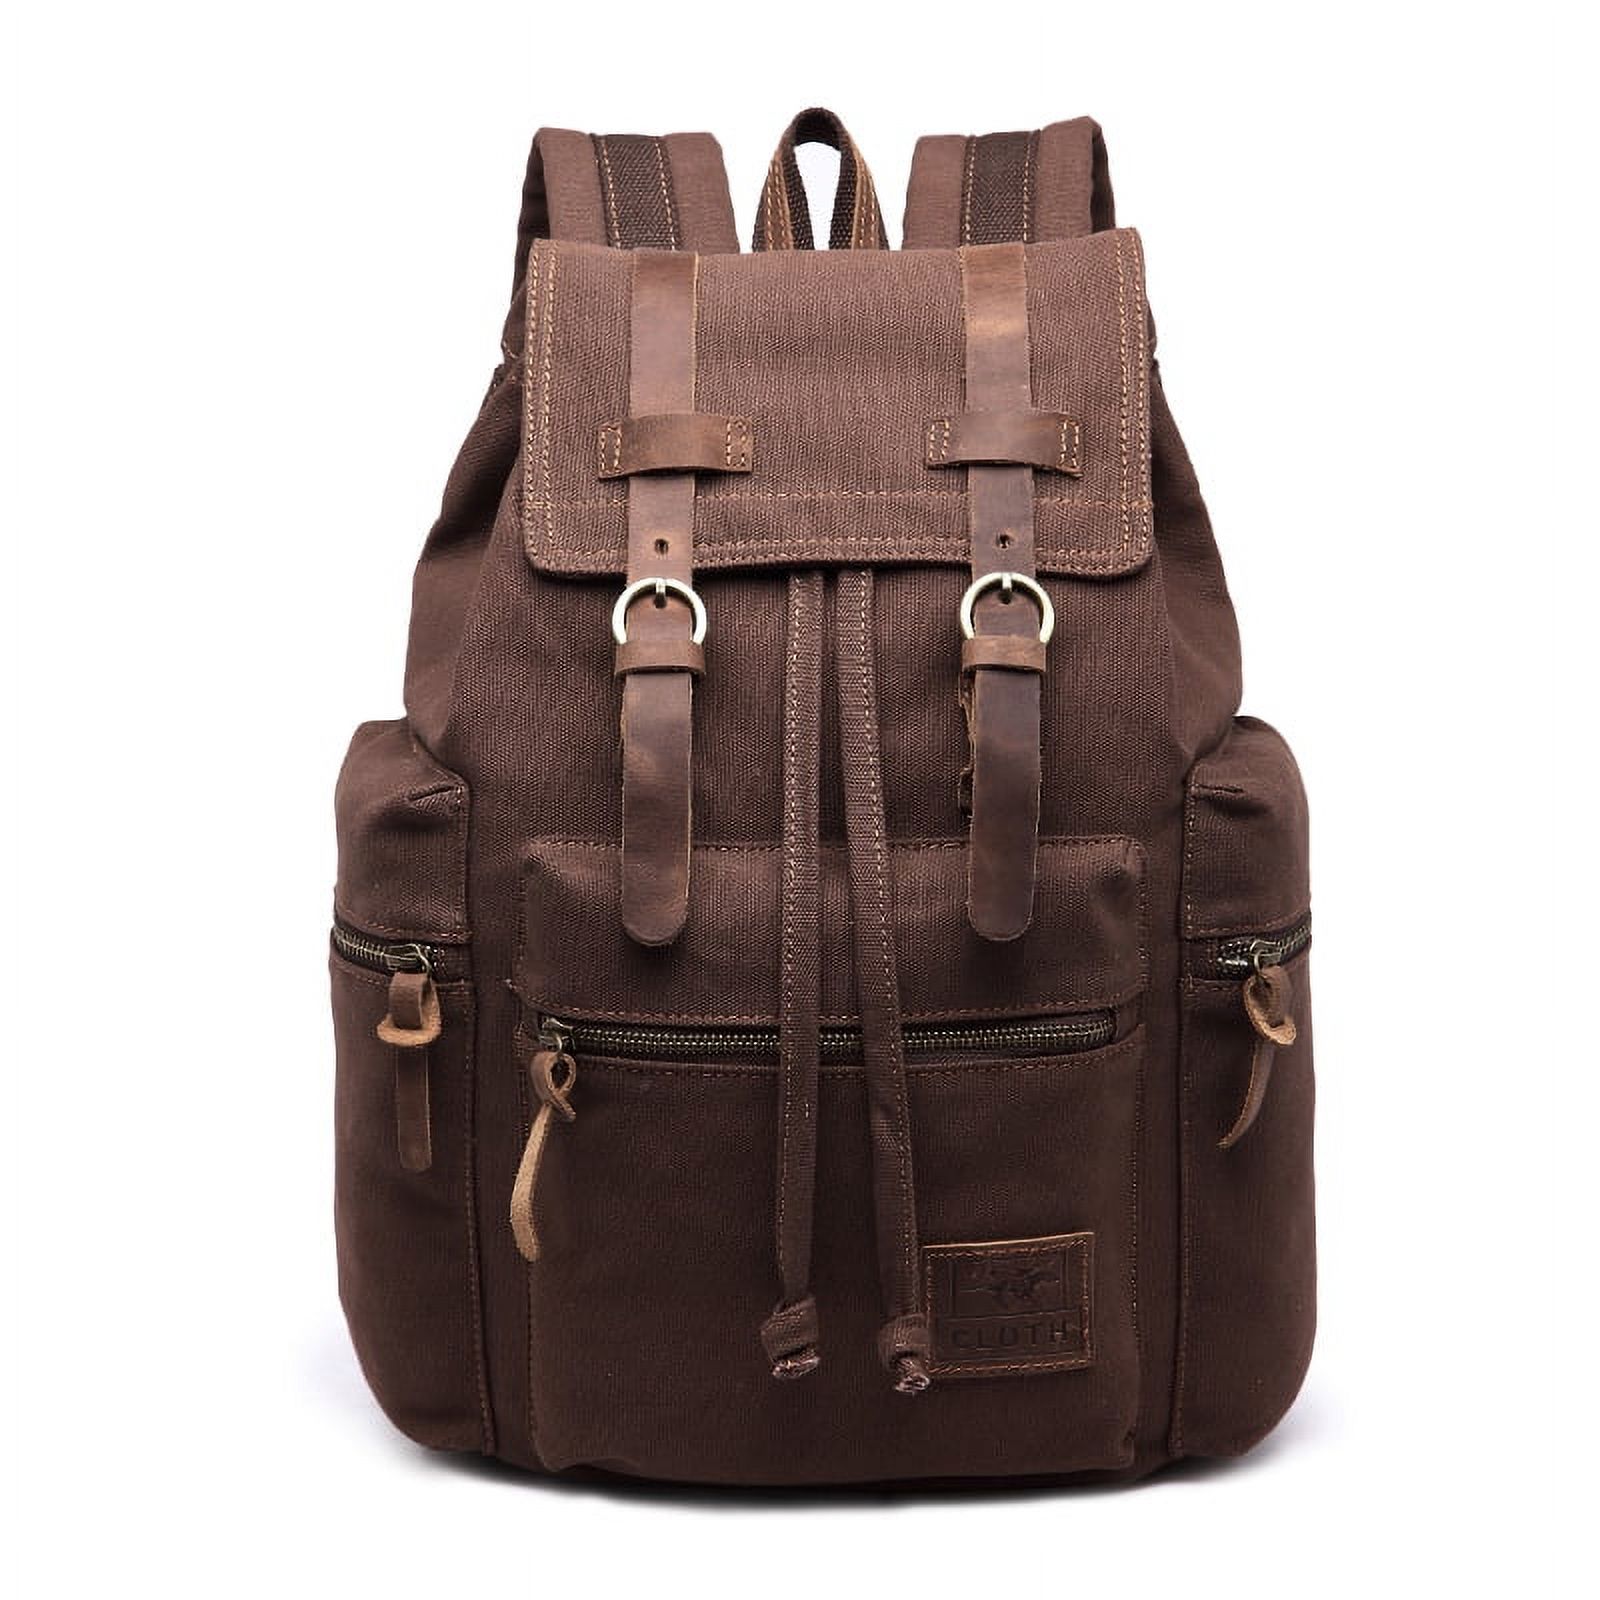 Canvas Sport Rucksack Khaki made of high quality material canvas Smooth and durable zipper,high grade hardware backpack - image 1 of 2